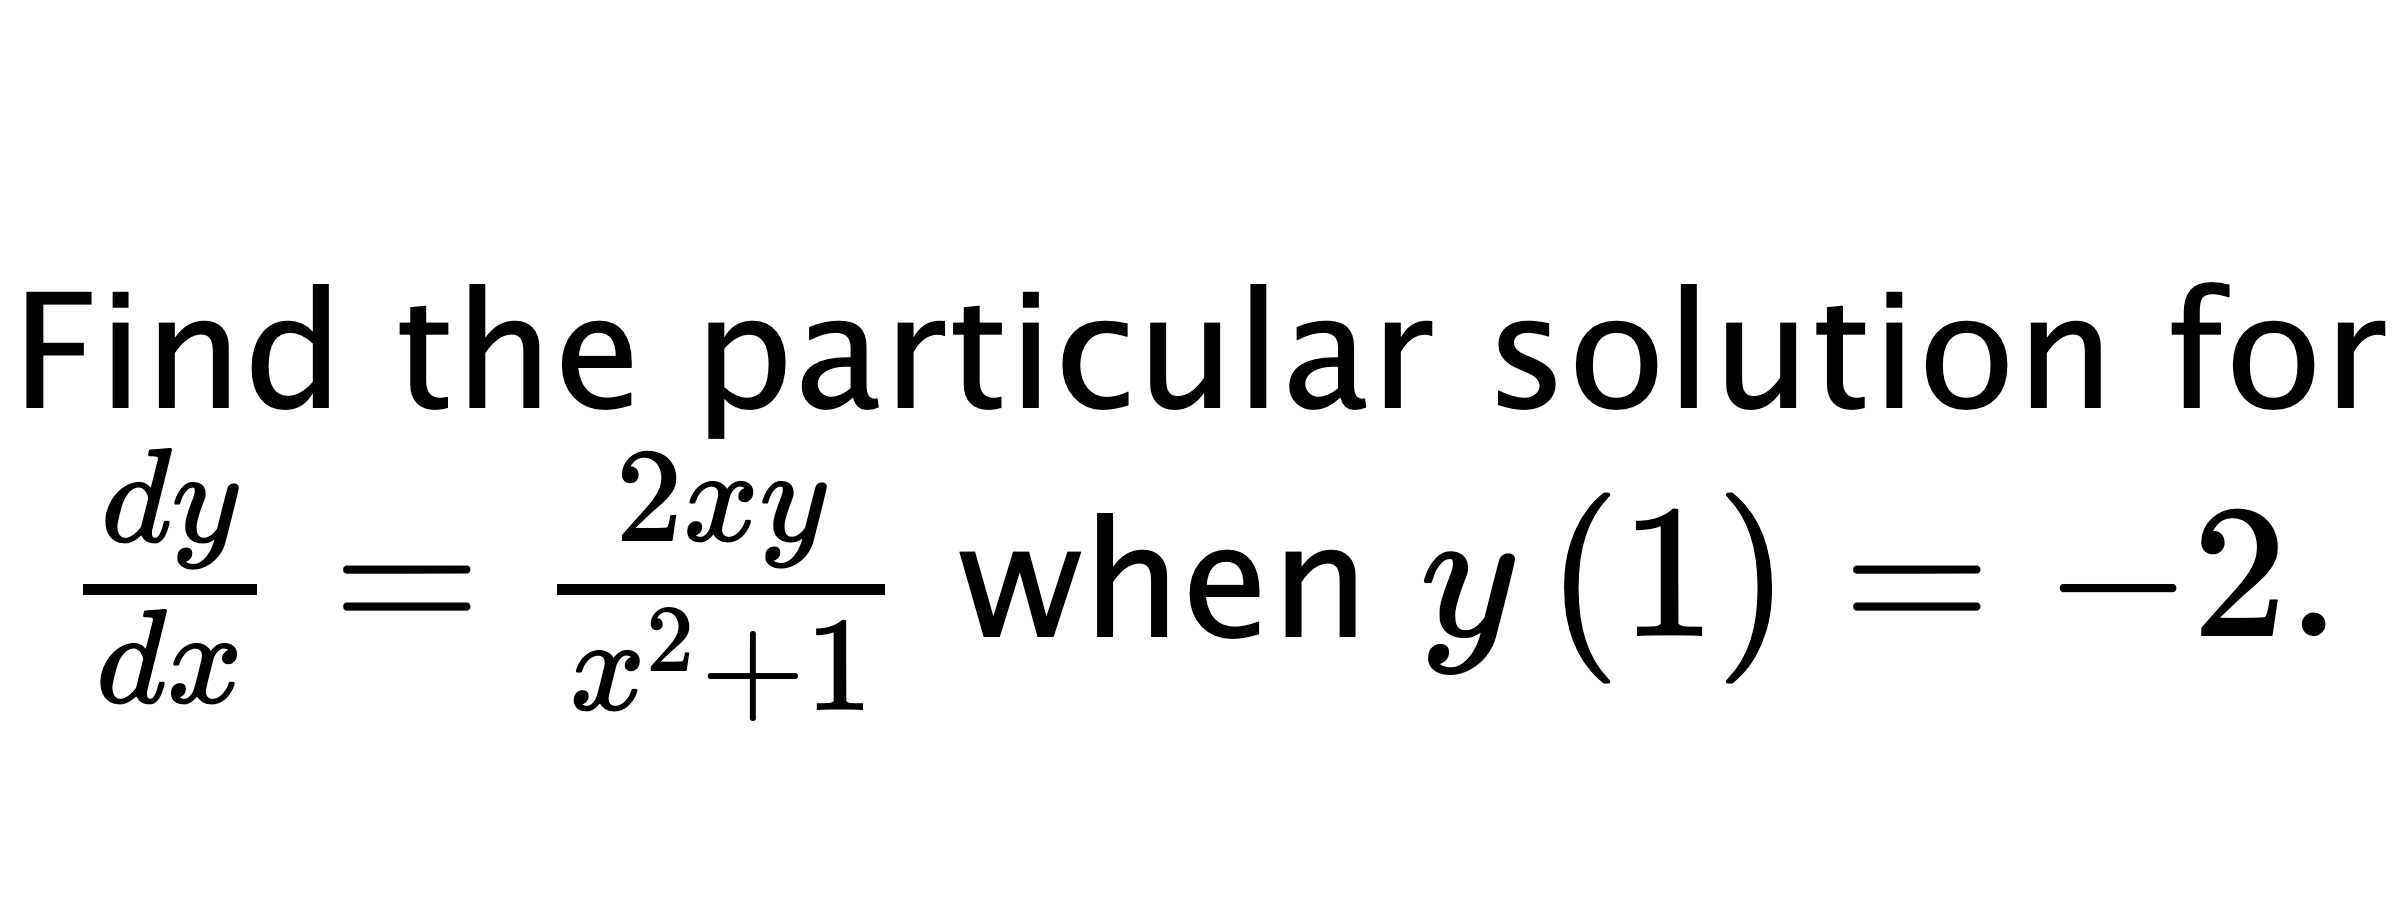  Find the particular solution for $ \frac{dy}{dx}=\frac{2xy}{x^2+1} $ when $ y\left( 1 \right)=-2. $